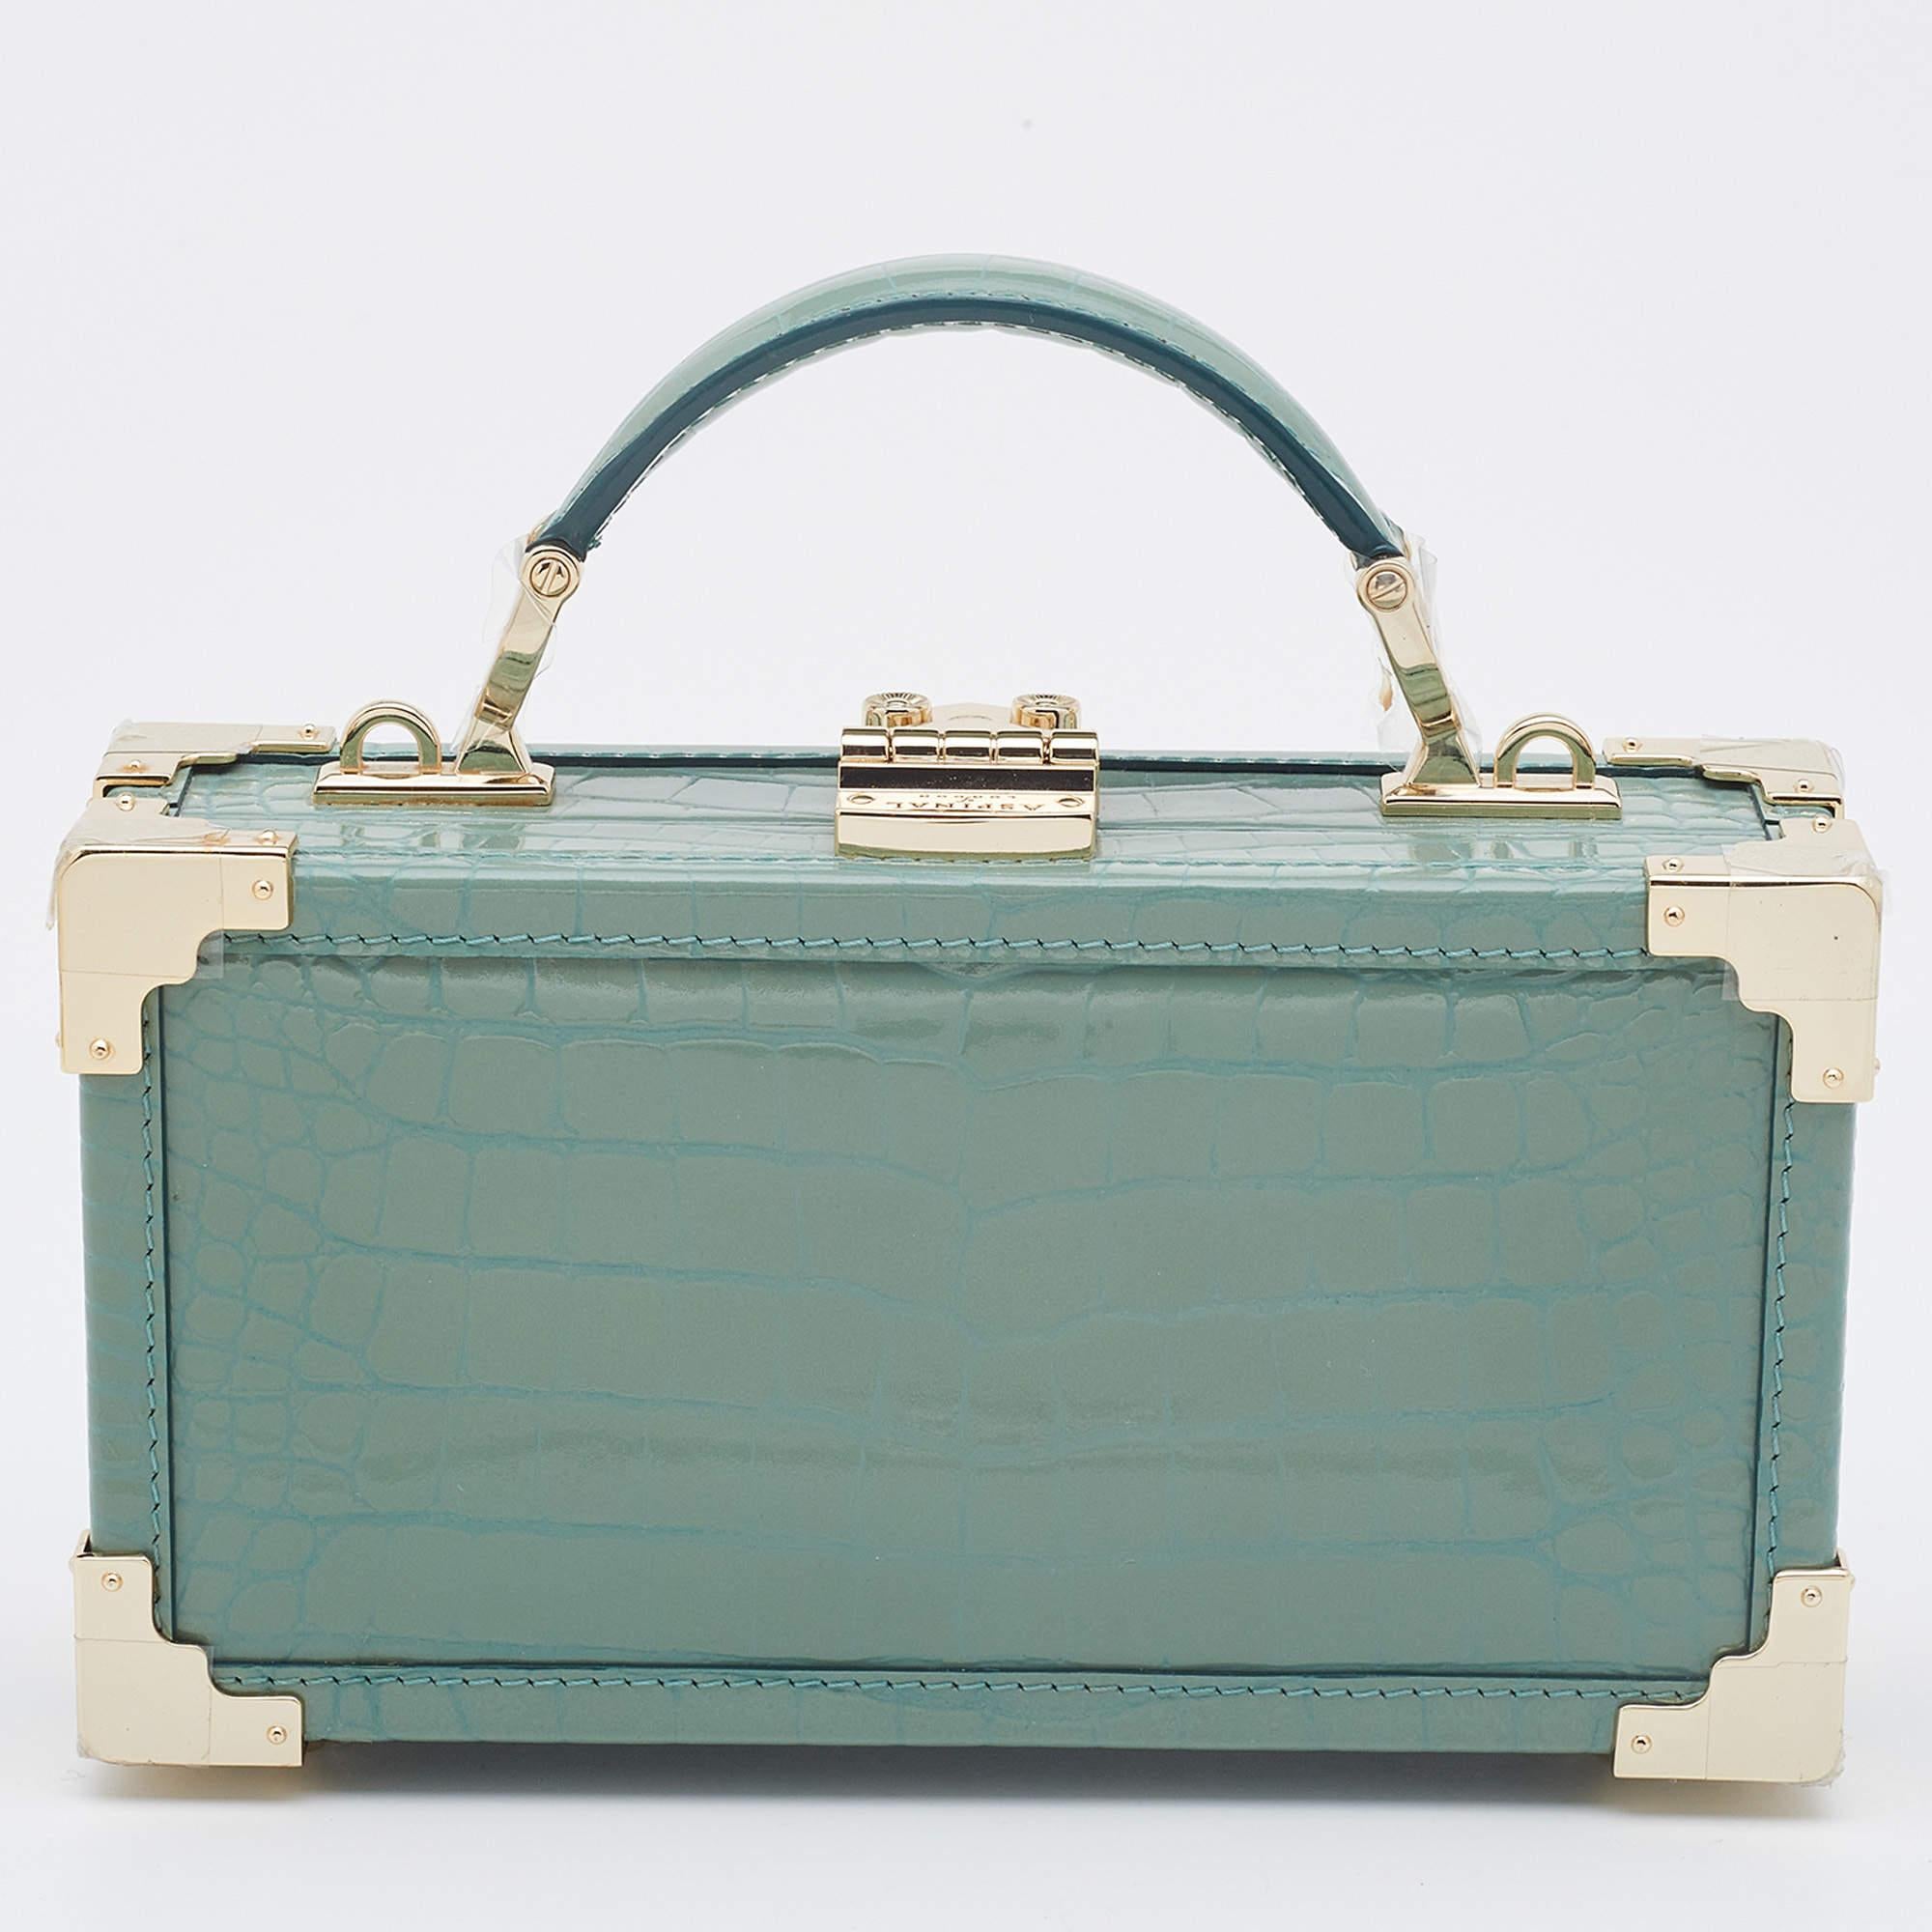 Crafted from croc-embossed patent leather in a lovely green hue, this Trinket bag is just amazing! Aspinal Of London has designed this luxurious top handle bag with a spacious fabric interior. It has an exquisite design, a detachable chain link, and